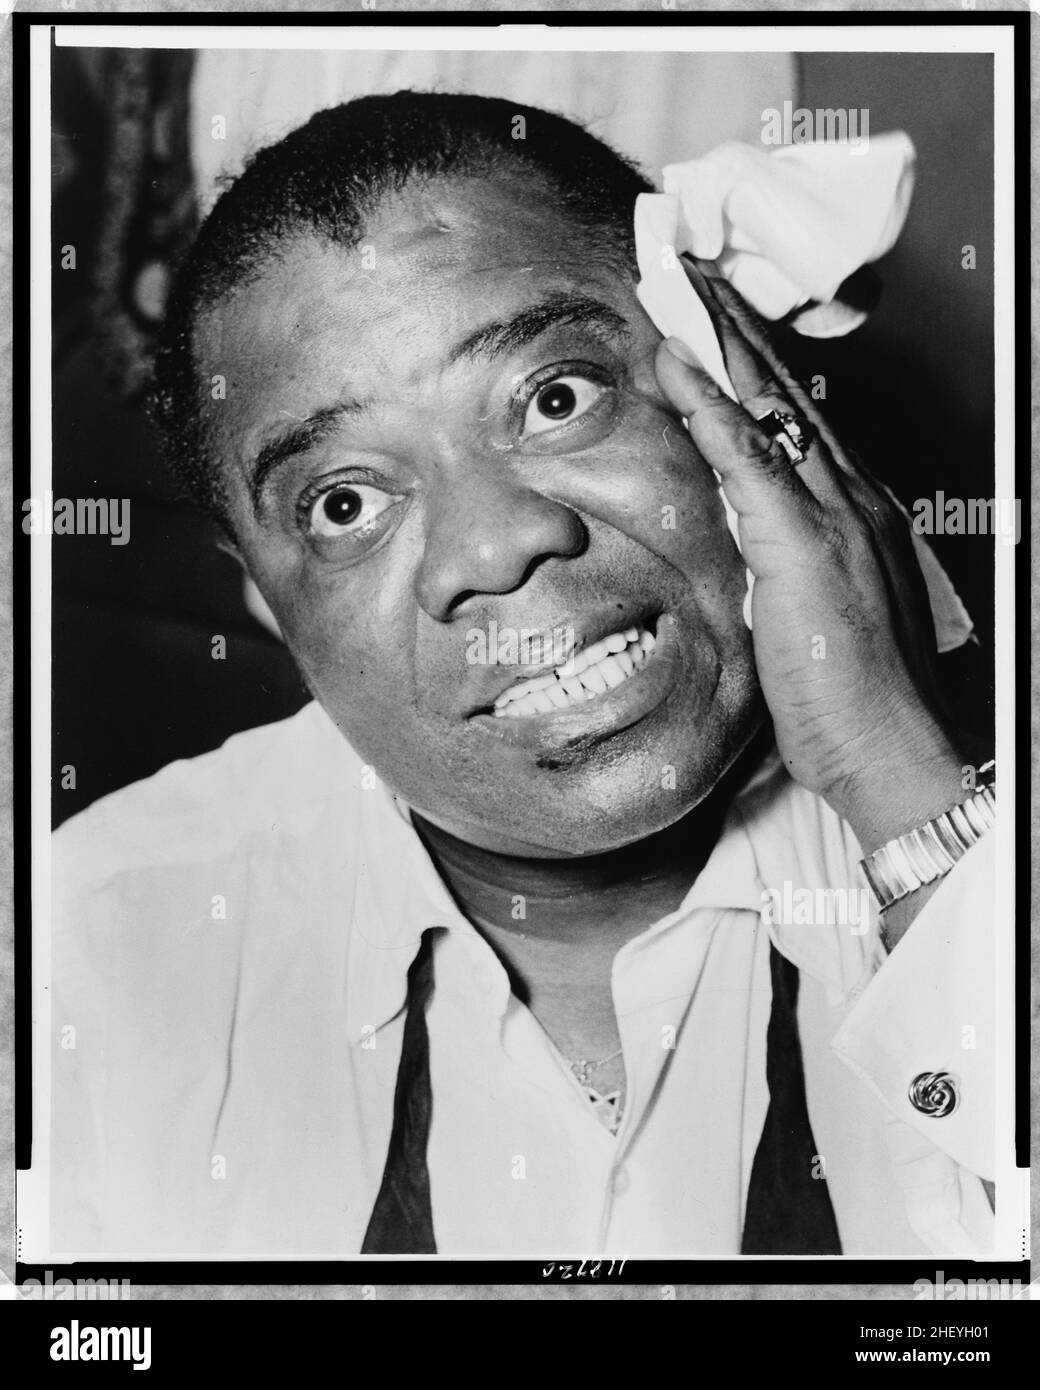 Louis Armstrong in 1953, head-and-shoulders portrait / World Telegram & Sun photo by Herman Hiller Stock Photo